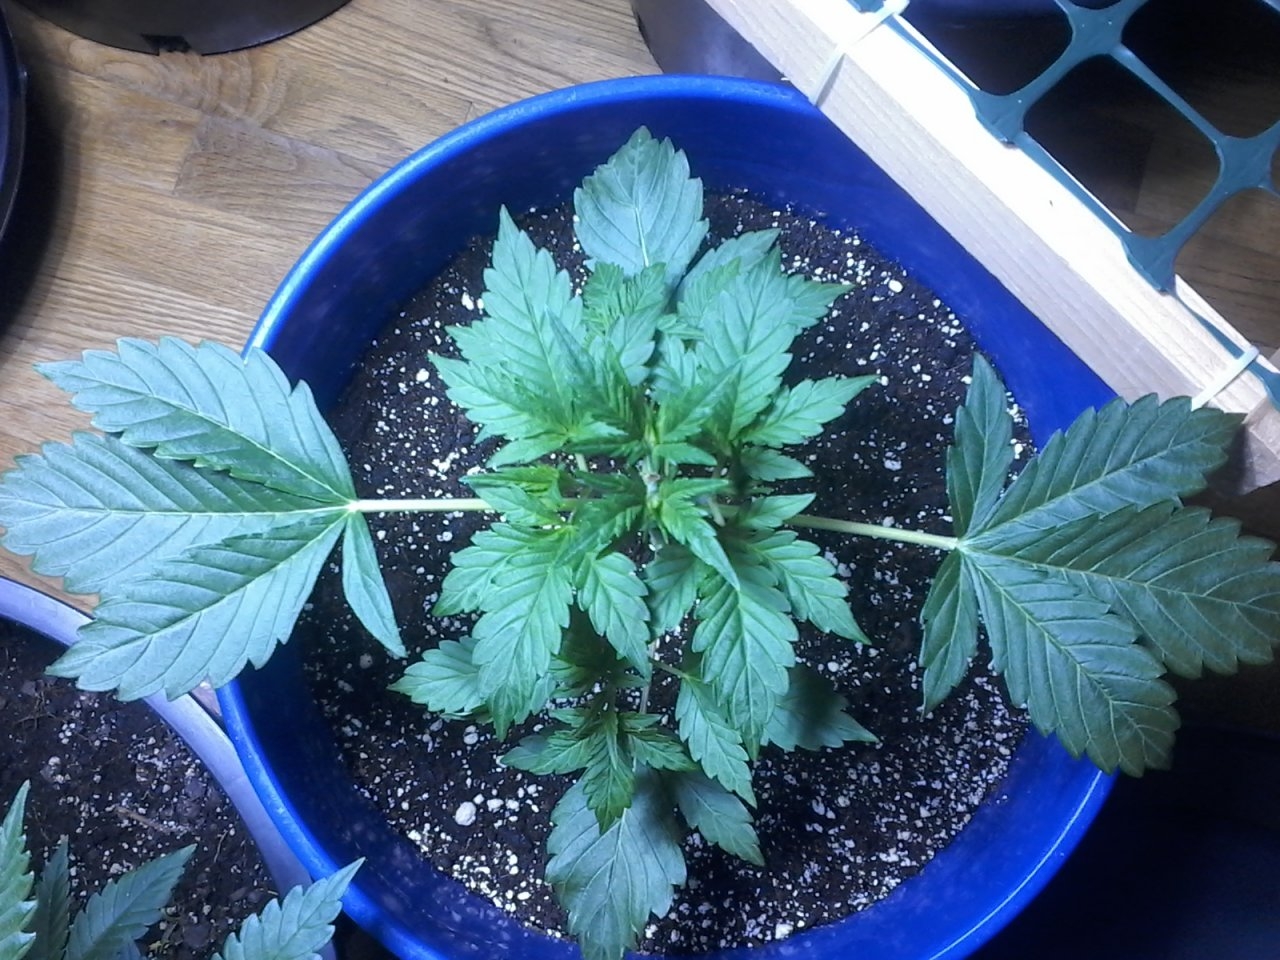 Critical purple auto with hybrid vigor got topped then top two fan shaders removed for light penetration so side shoots can hit the canopy.